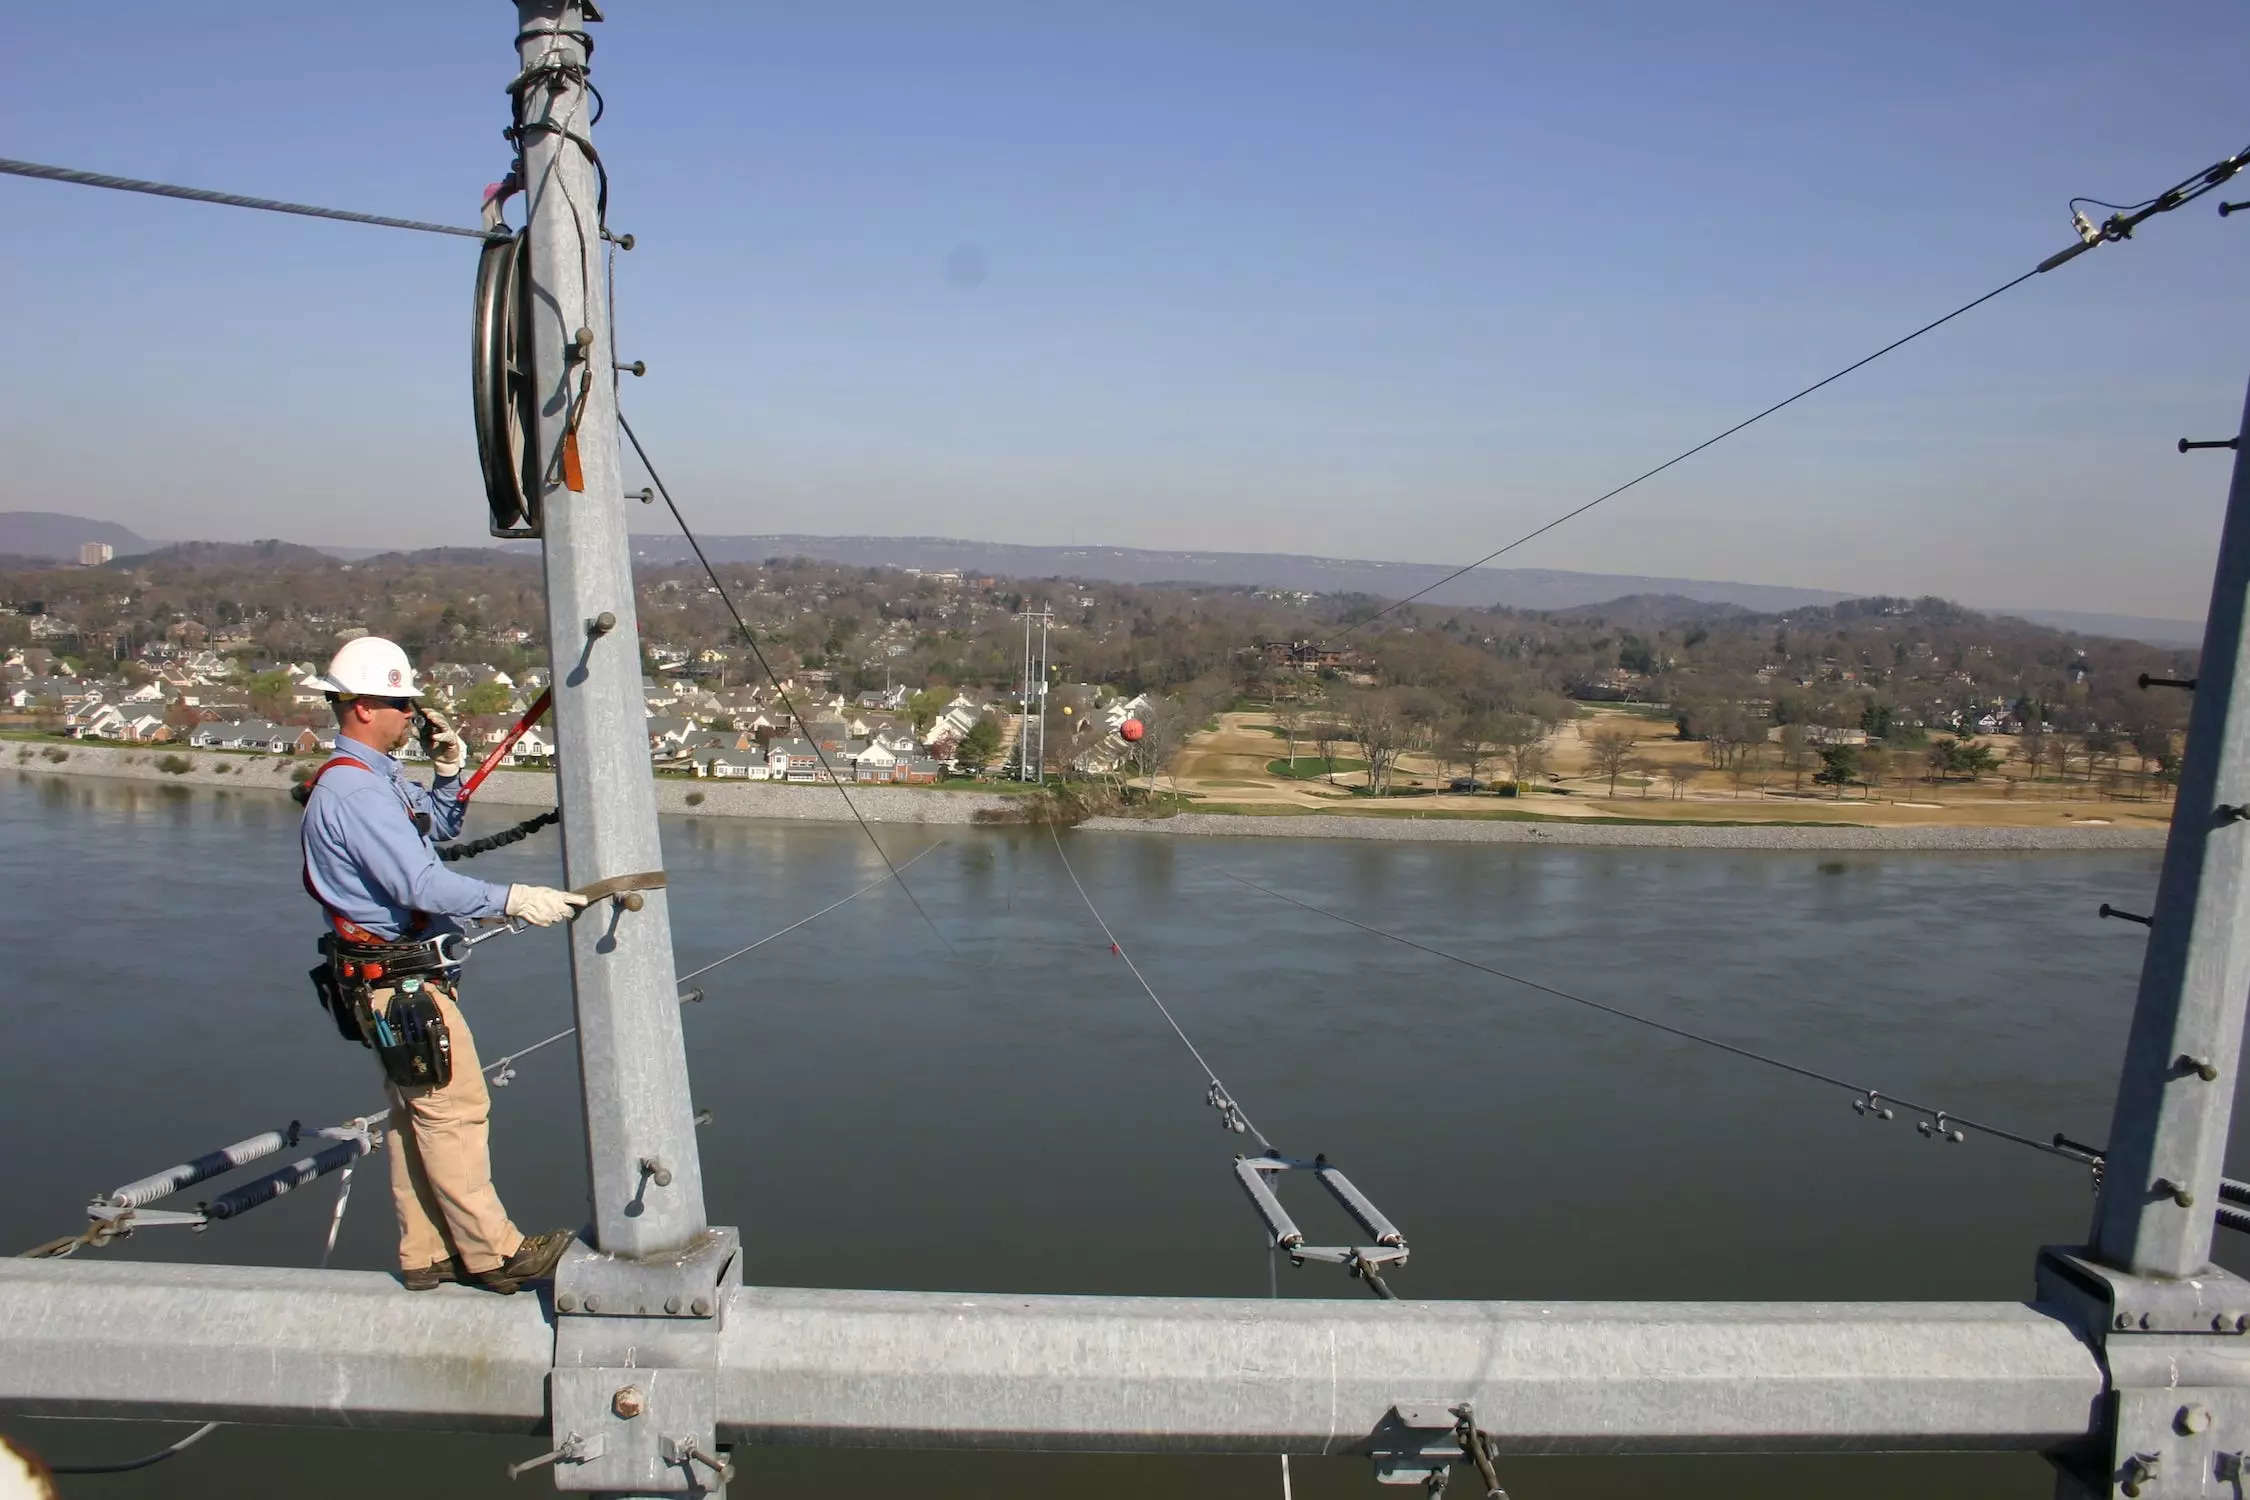 worker in hardhat wearing harness stands on large metal frame above a wide river with homes on the other side